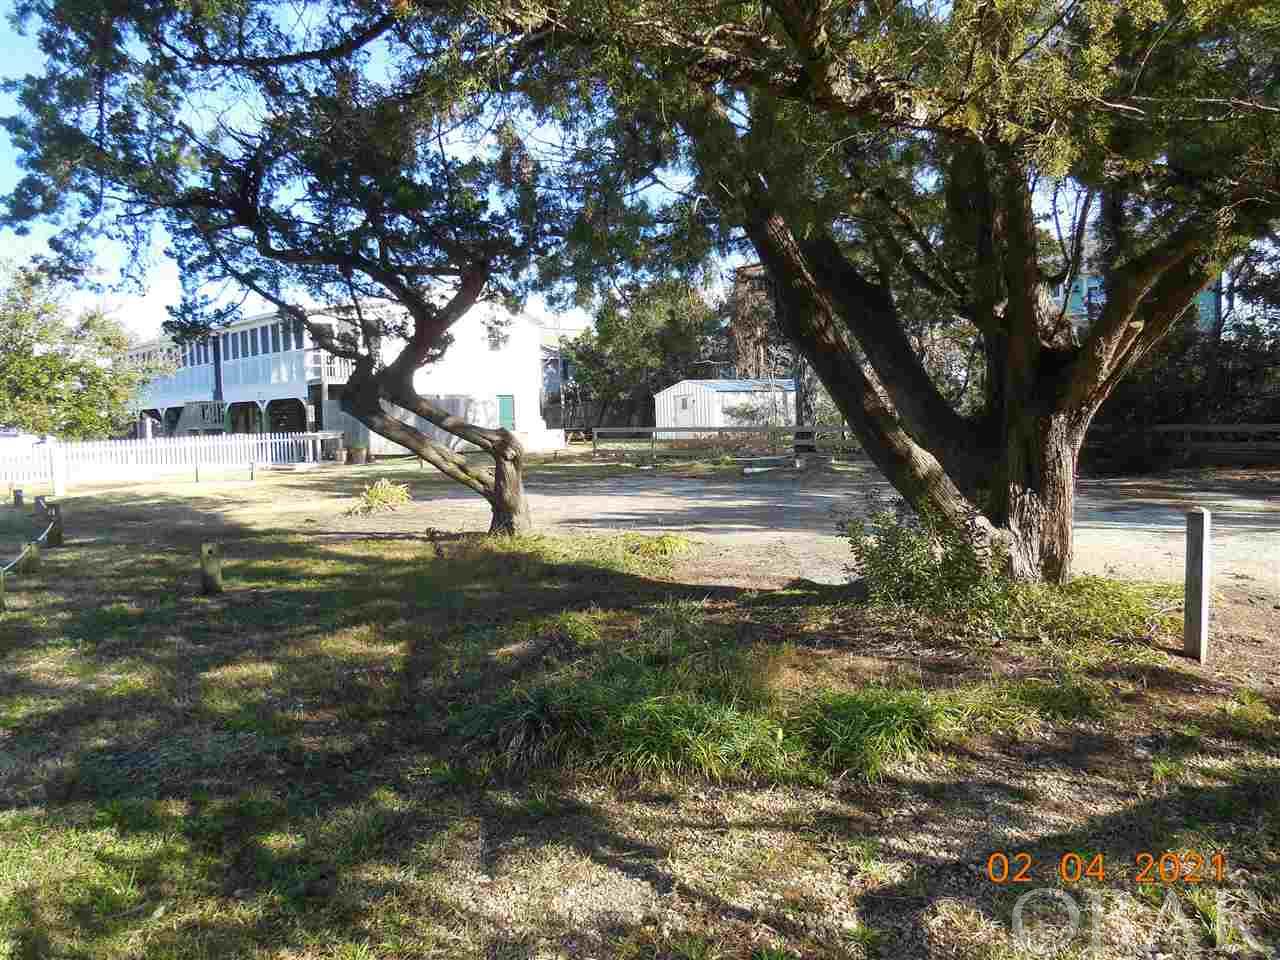 Ready to build!!! A 5163 sq. ft. lot in Live Oak Village with an installed 4 bedroom gravity flow septic system and 4 bedroom/4 bath water meter. This property has mature trees and native vegetation. Cleared and ready to start the building process. Choose from several coastal home designs. Restrictive covenants in place to retain the historic charm and quaintness of Ocracoke. Taxes are an estimate only. Currently being taxed as one large parcel.